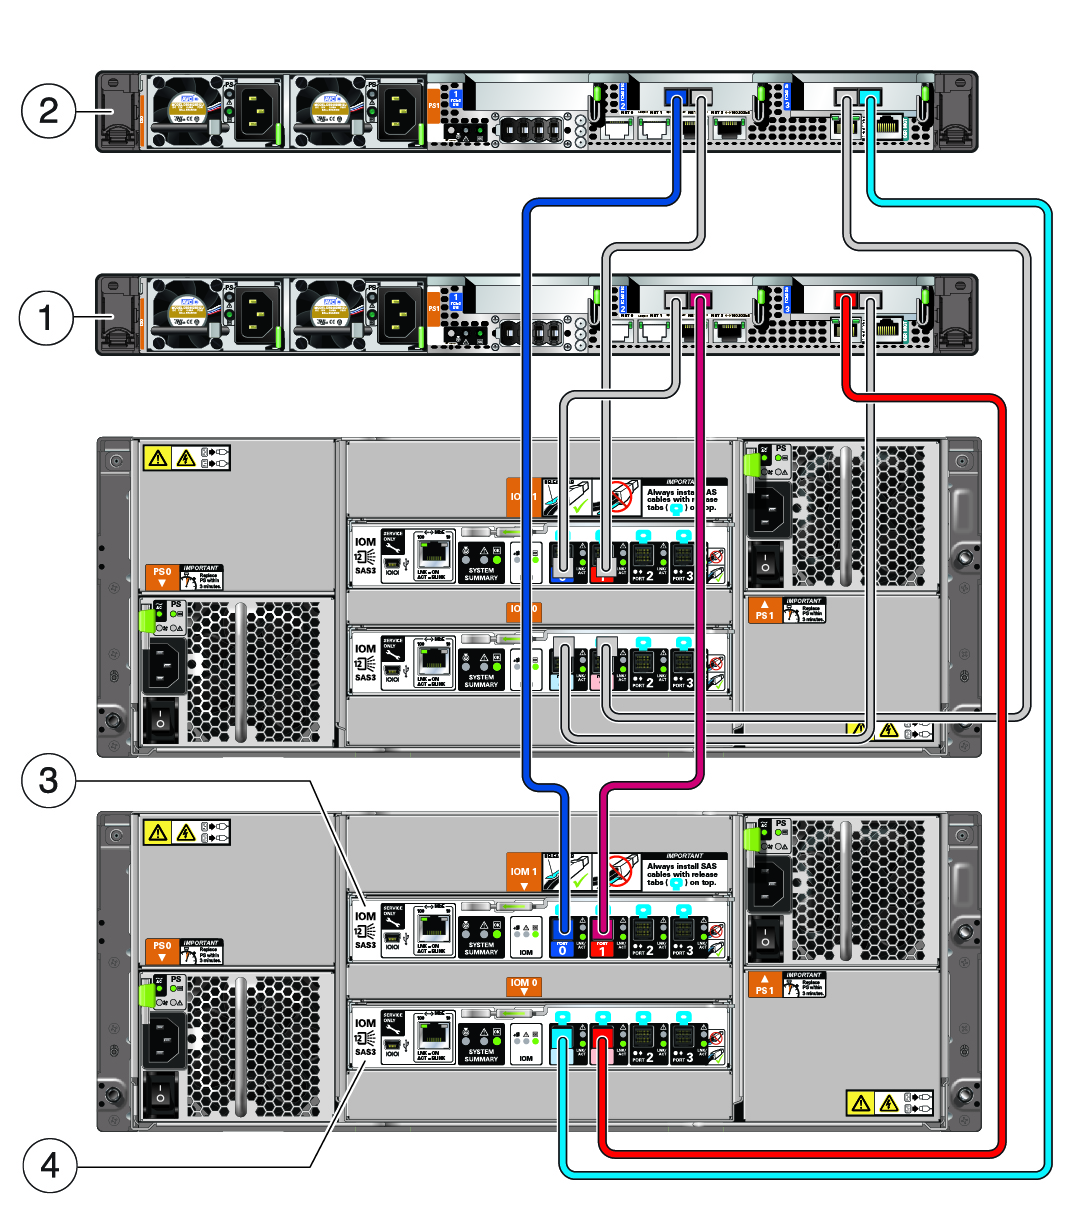 image:Figure showing the connections between the second storage array and                             the compute nodes.